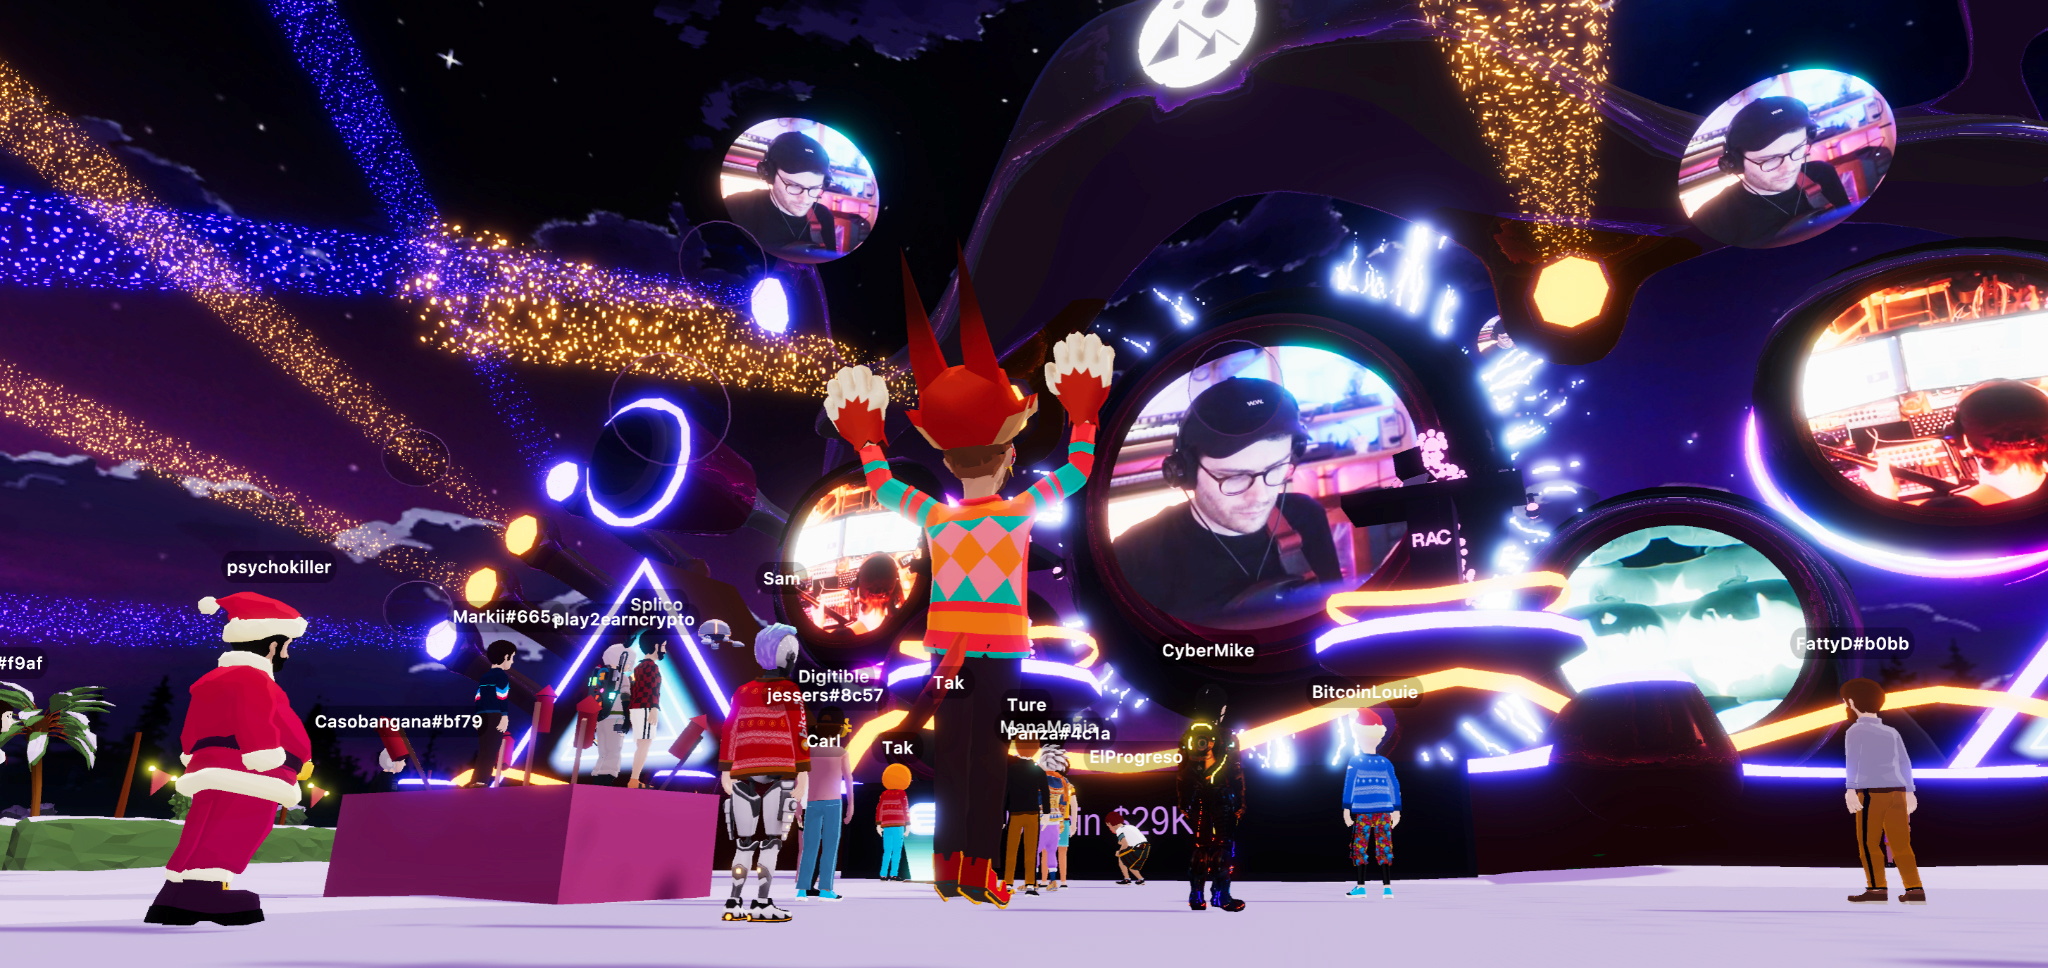 The DJ and producer RAC performs live at a New Year's Eve party within the virtual world Decentraland